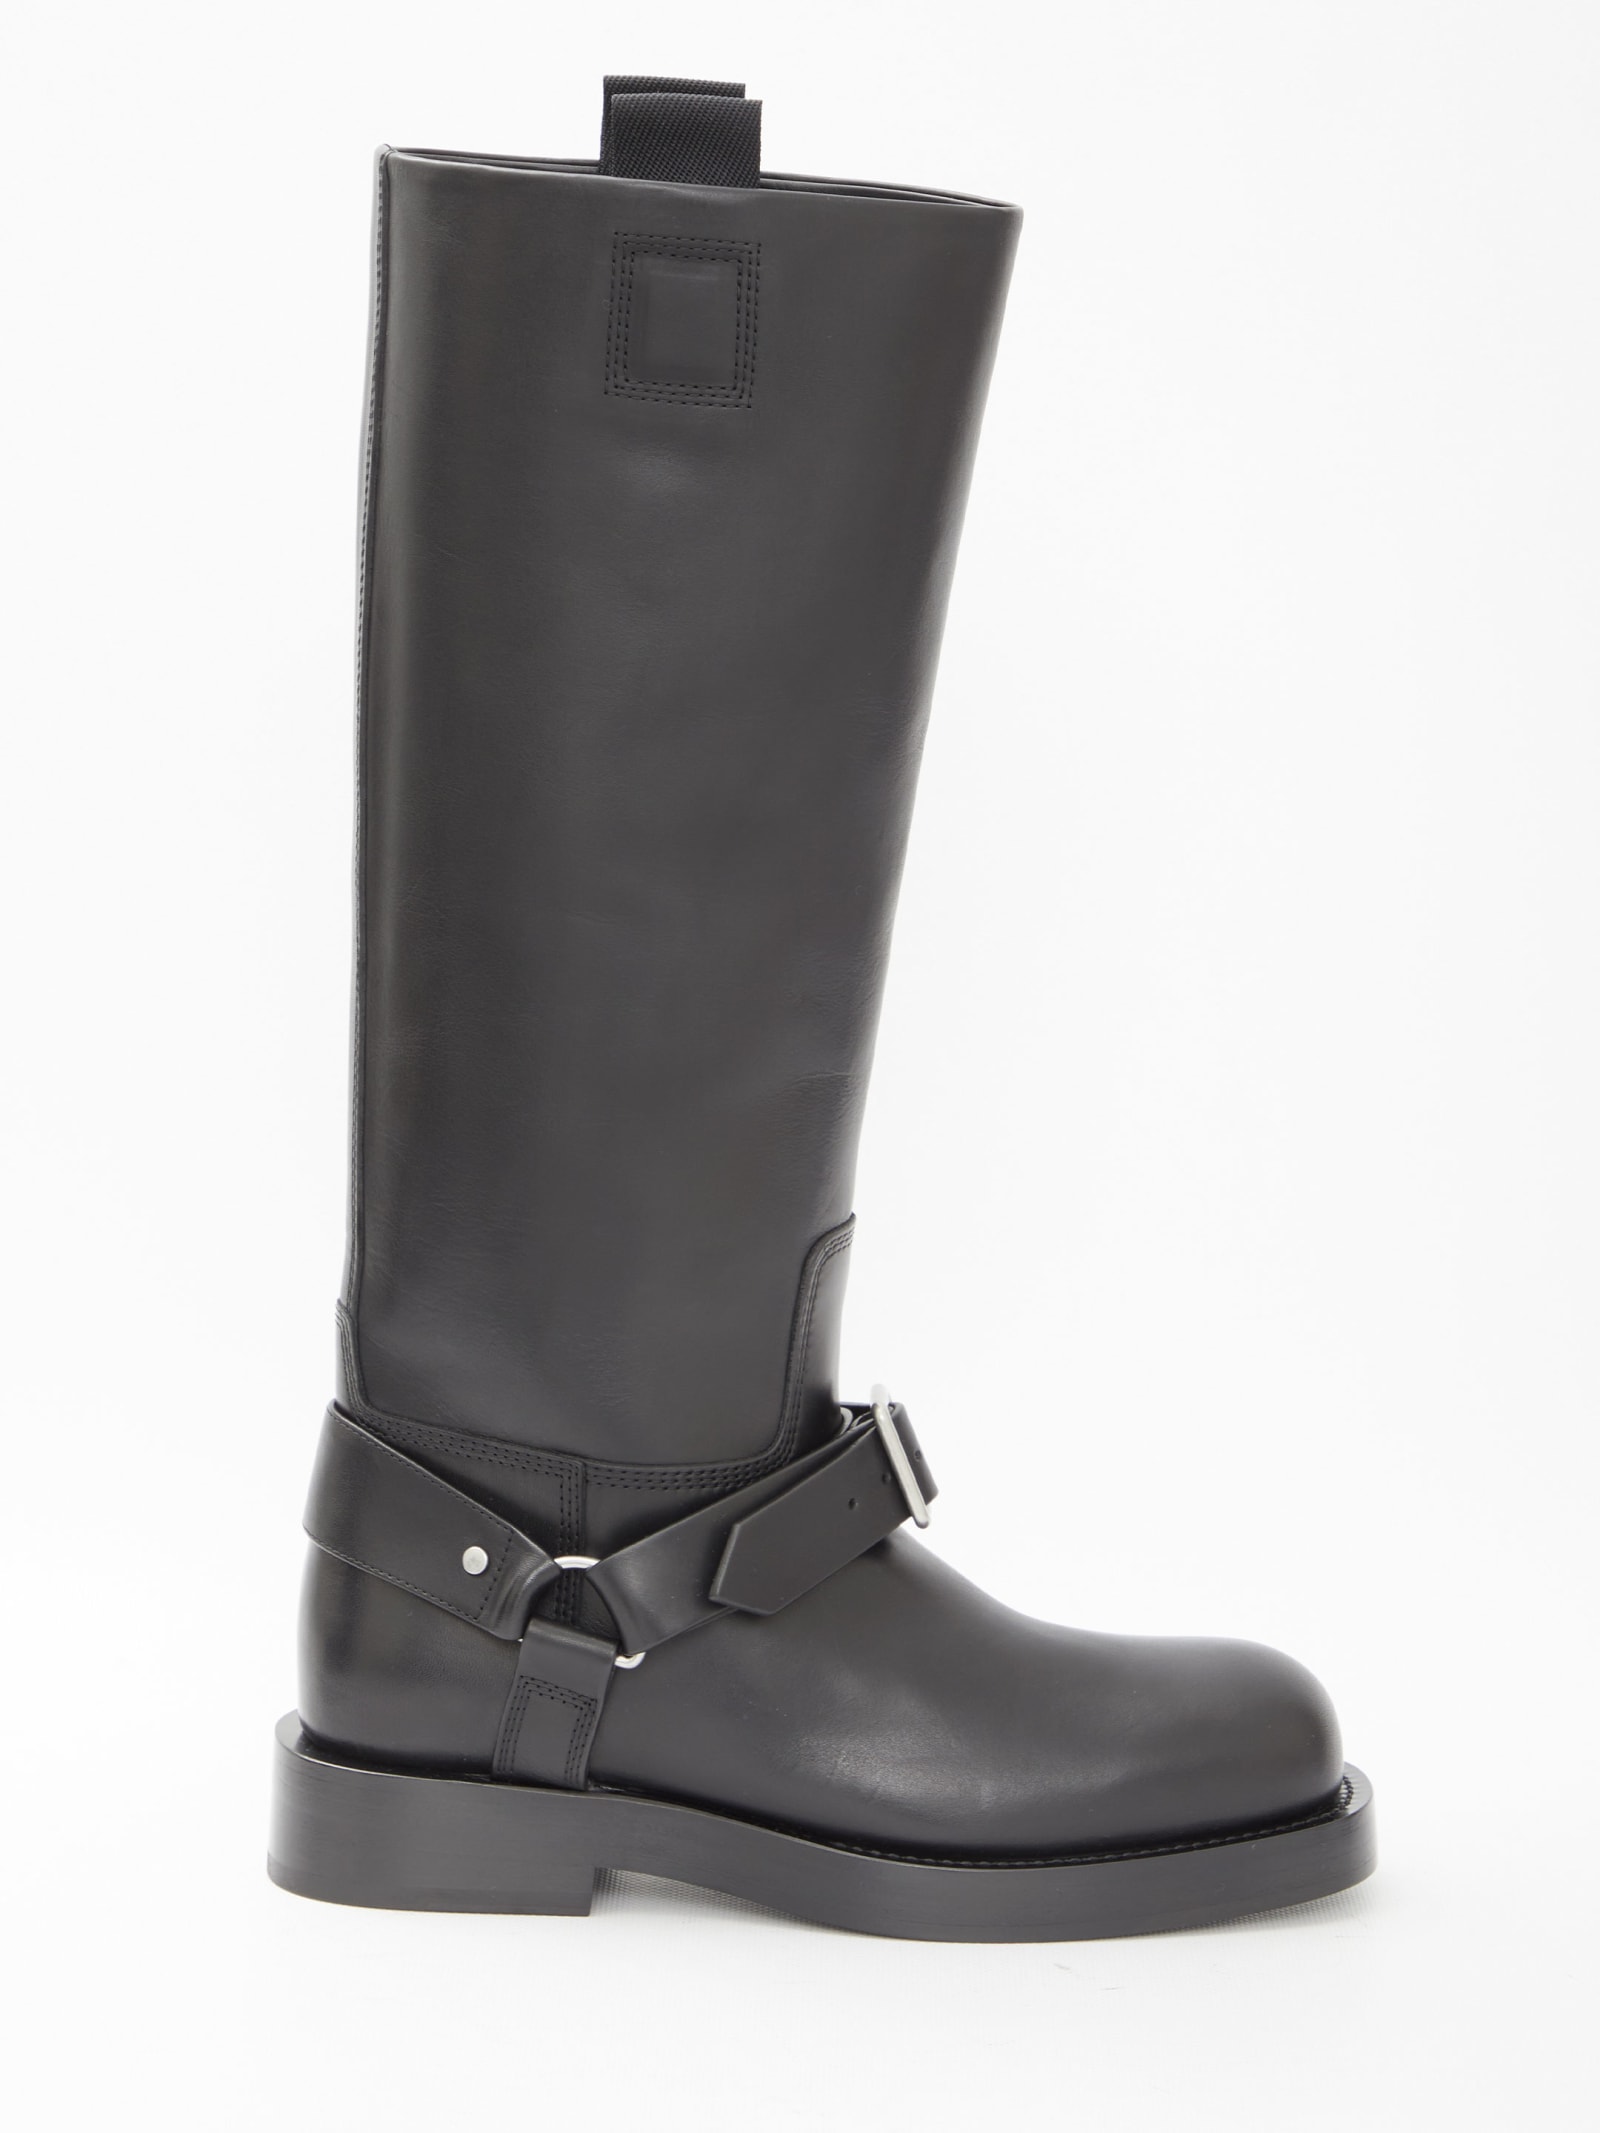 BURBERRY SADDLE HIGH BOOTS